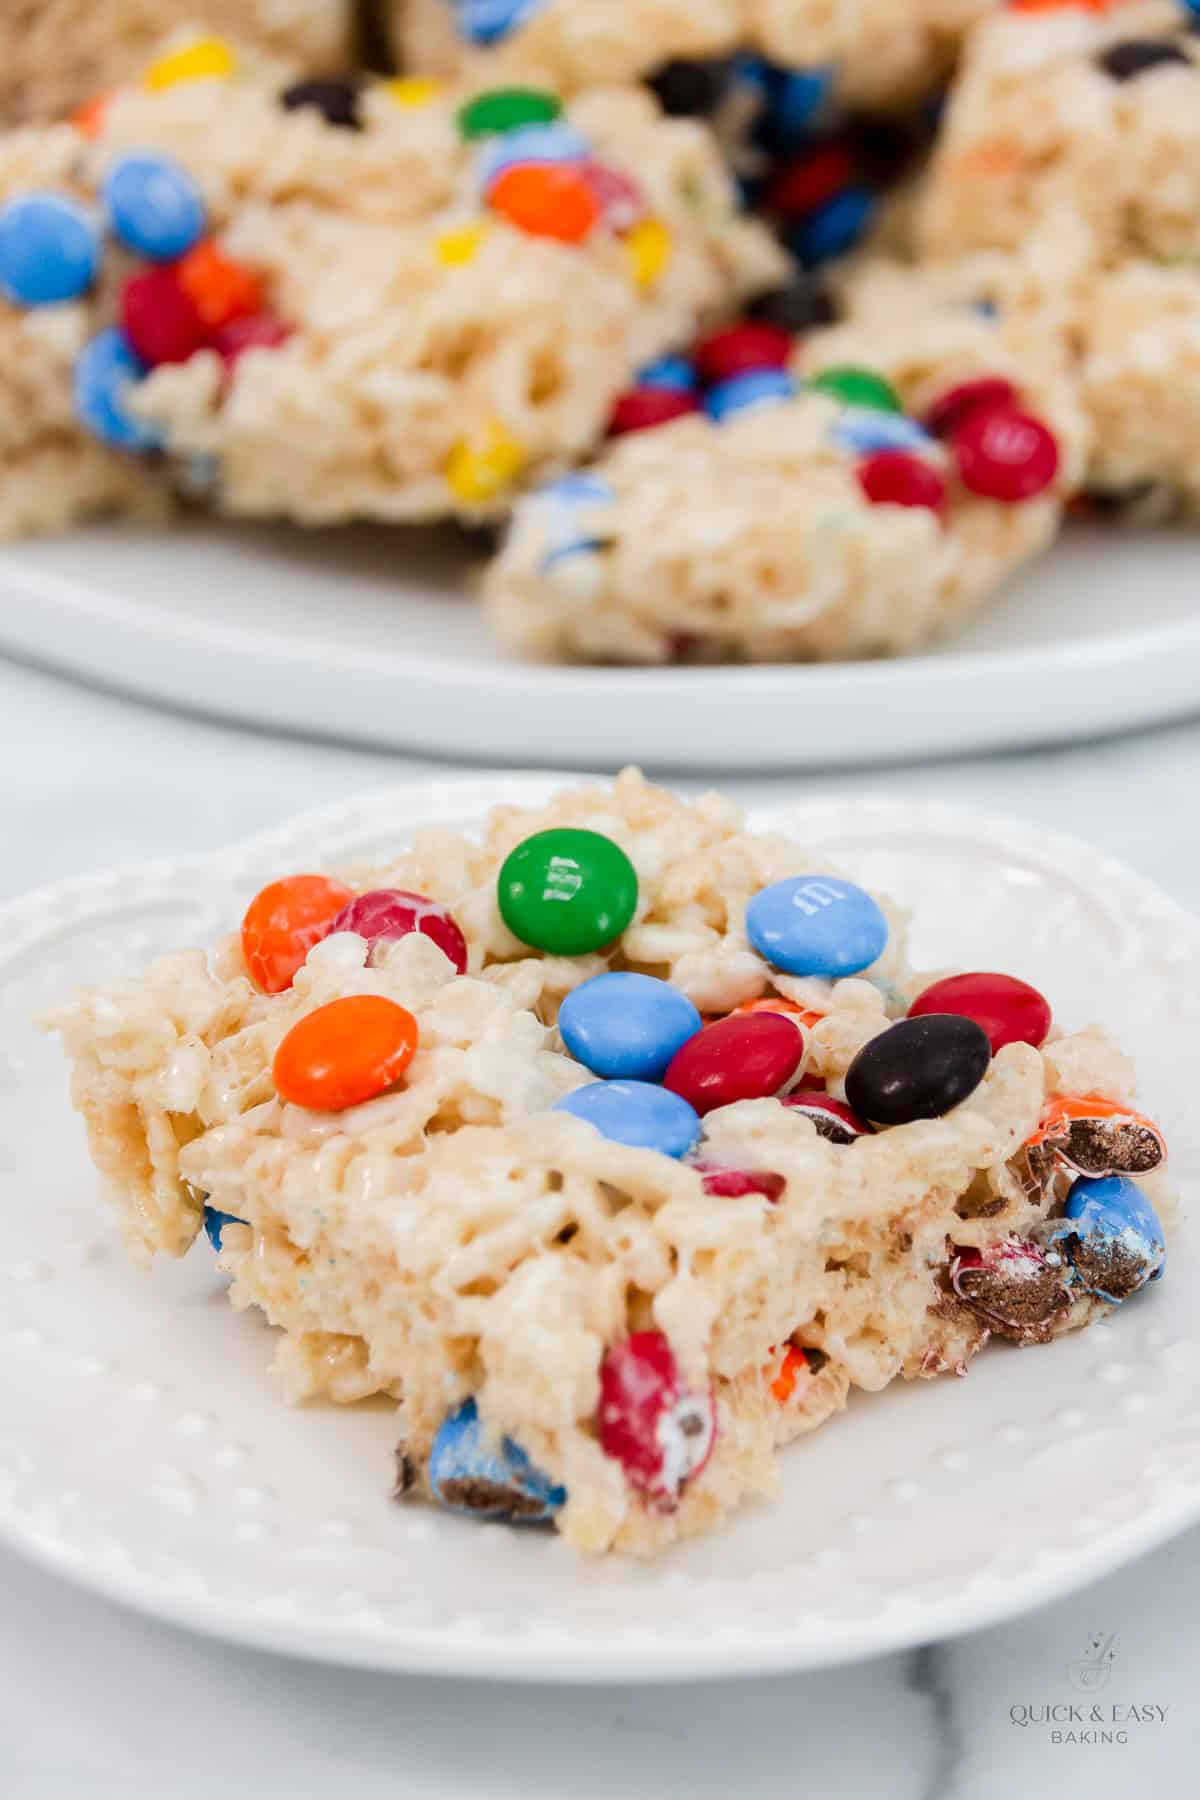 Top down close up of rice crispy treat on a plate with m&ms.